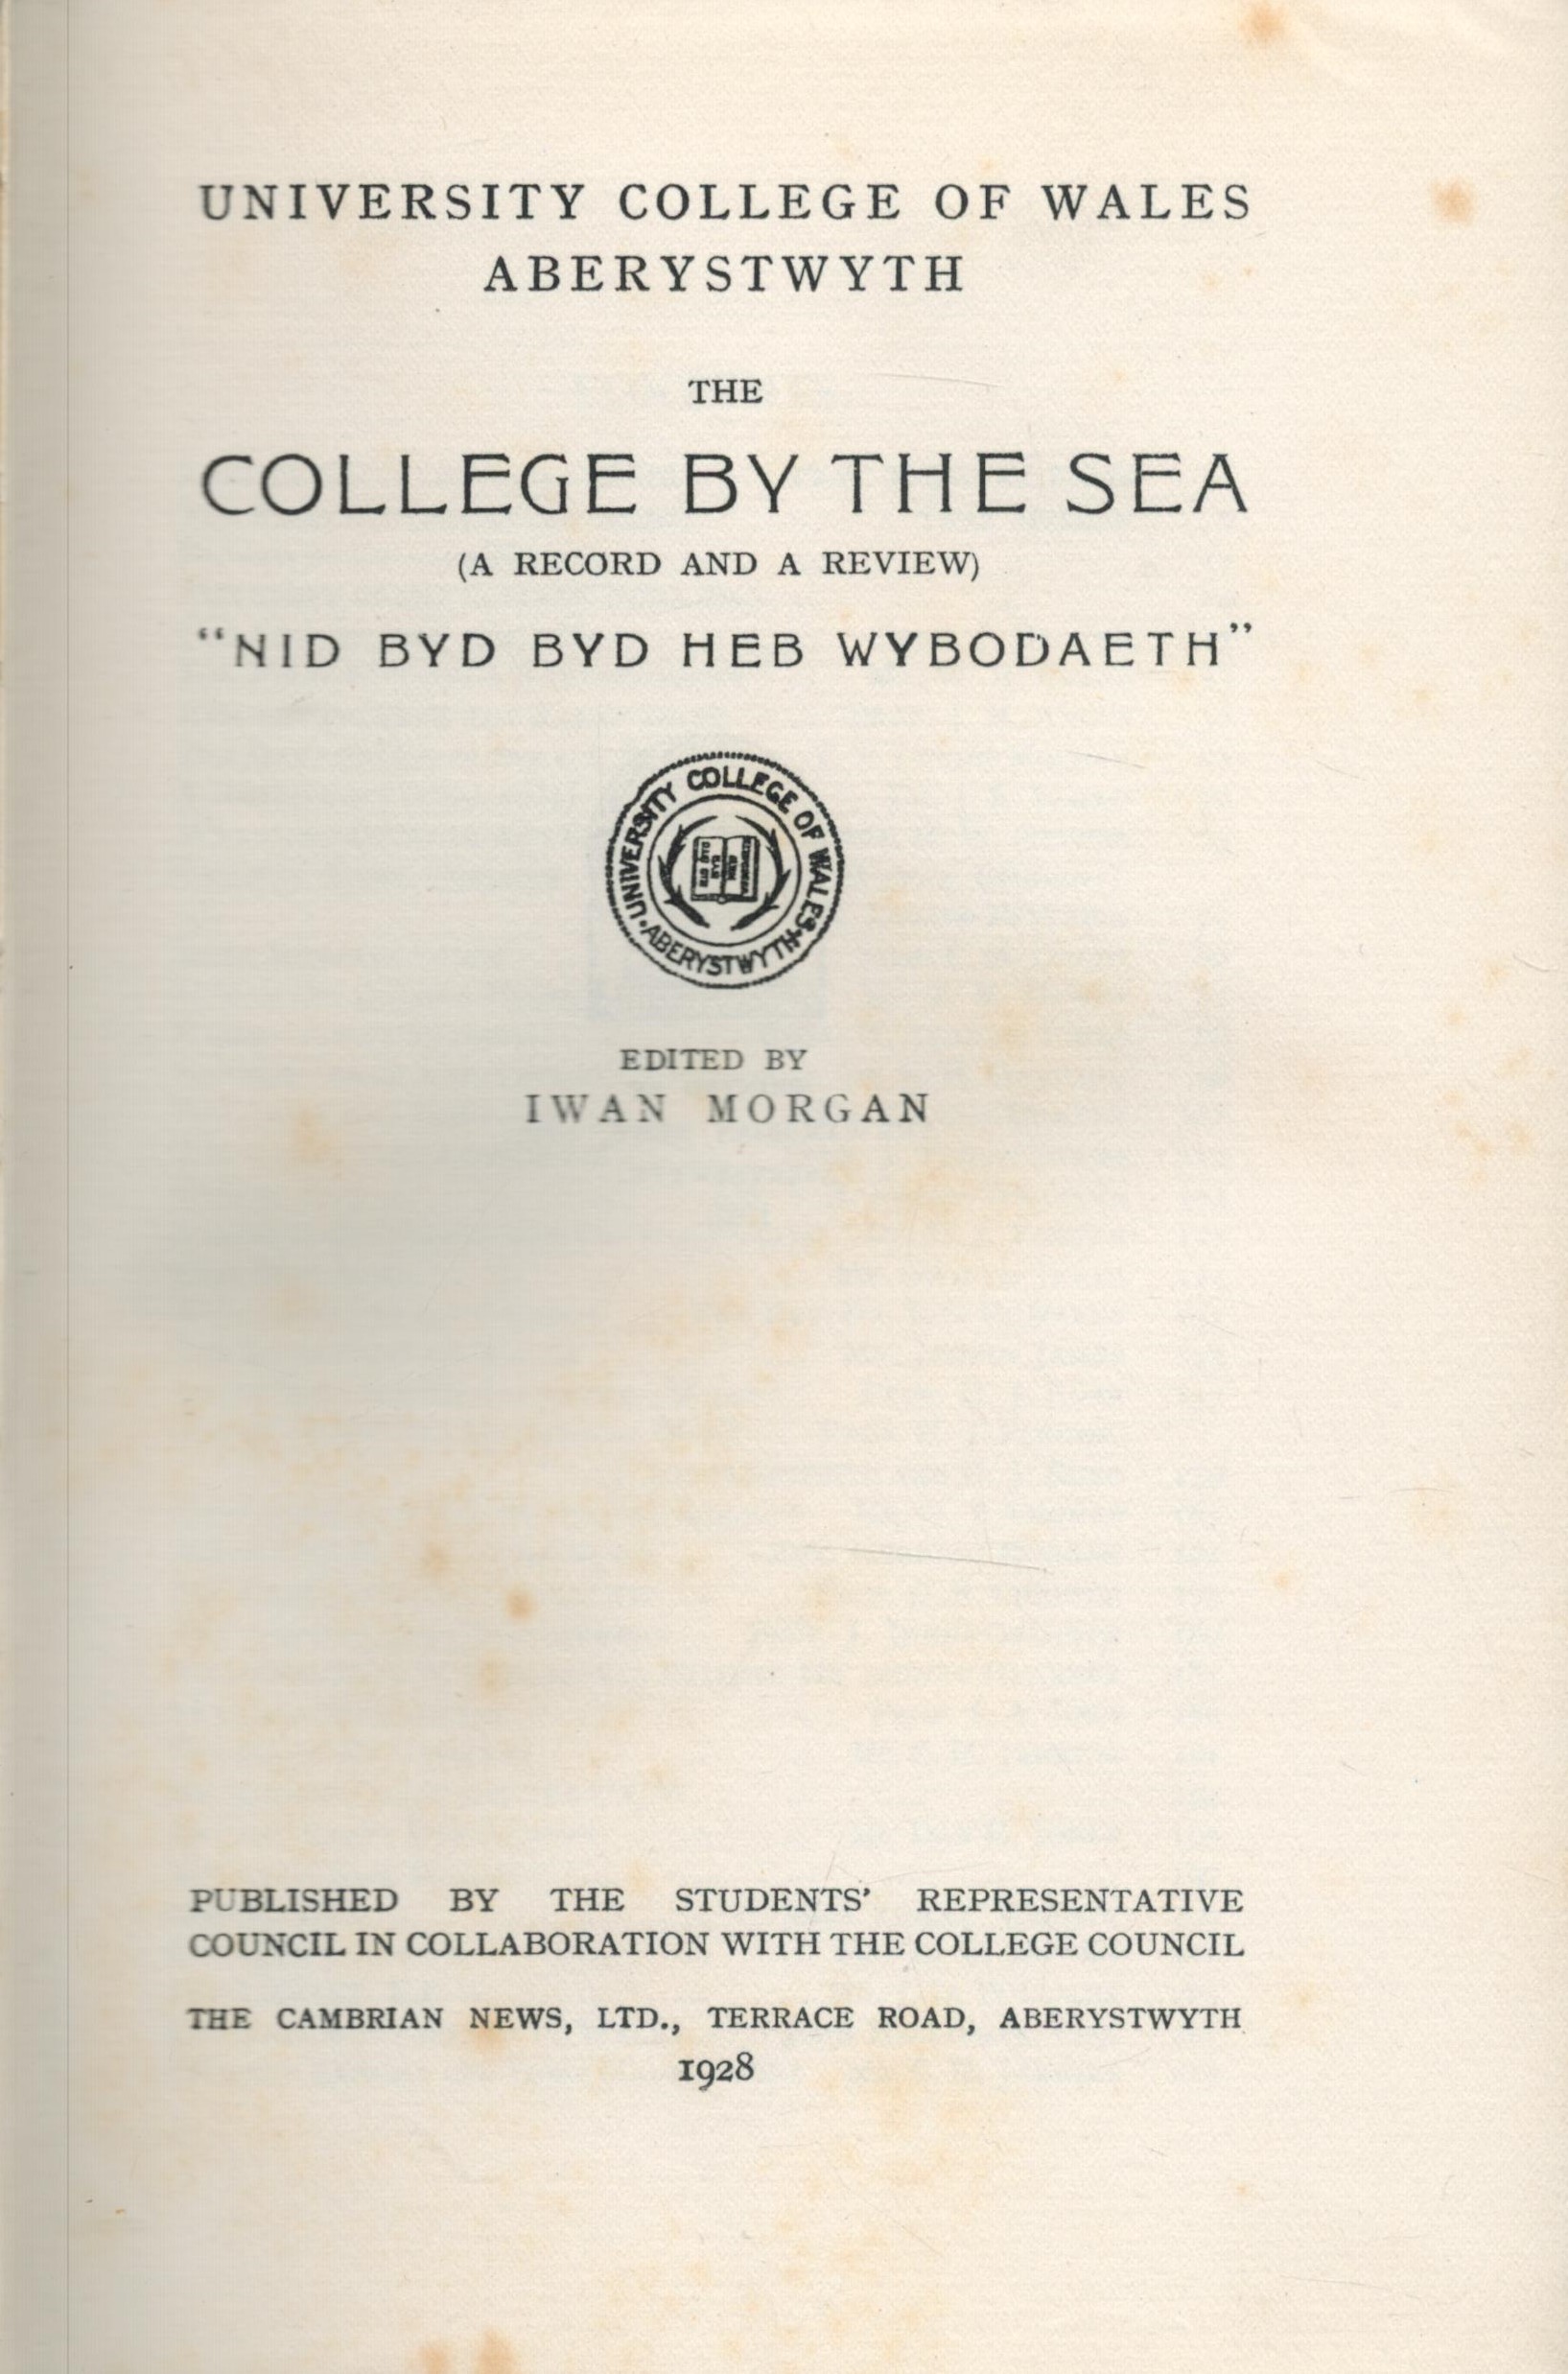 University College of Wales, Aberystwyth: The College by the Sea (a record and review) with - Image 2 of 3